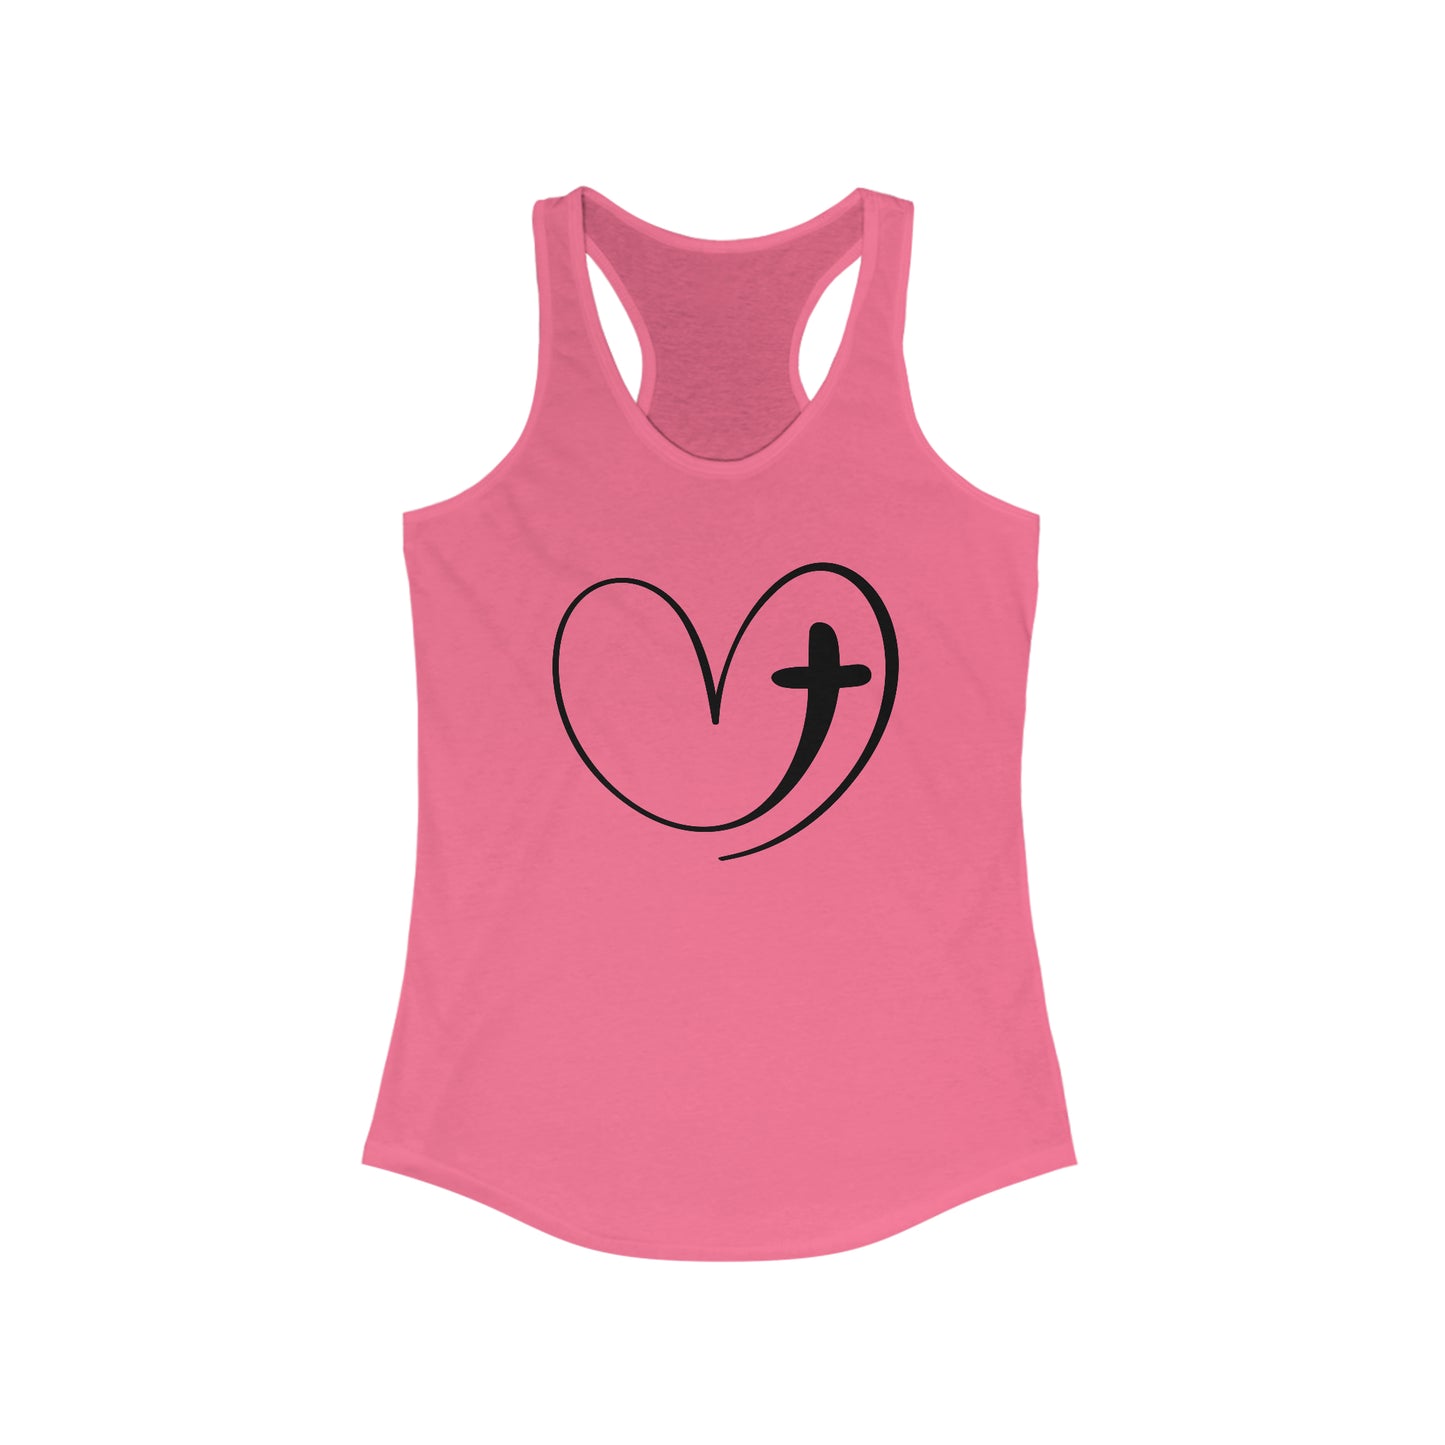 Cross Tank Top For Heart Tank For Easter Top For Spring Wear